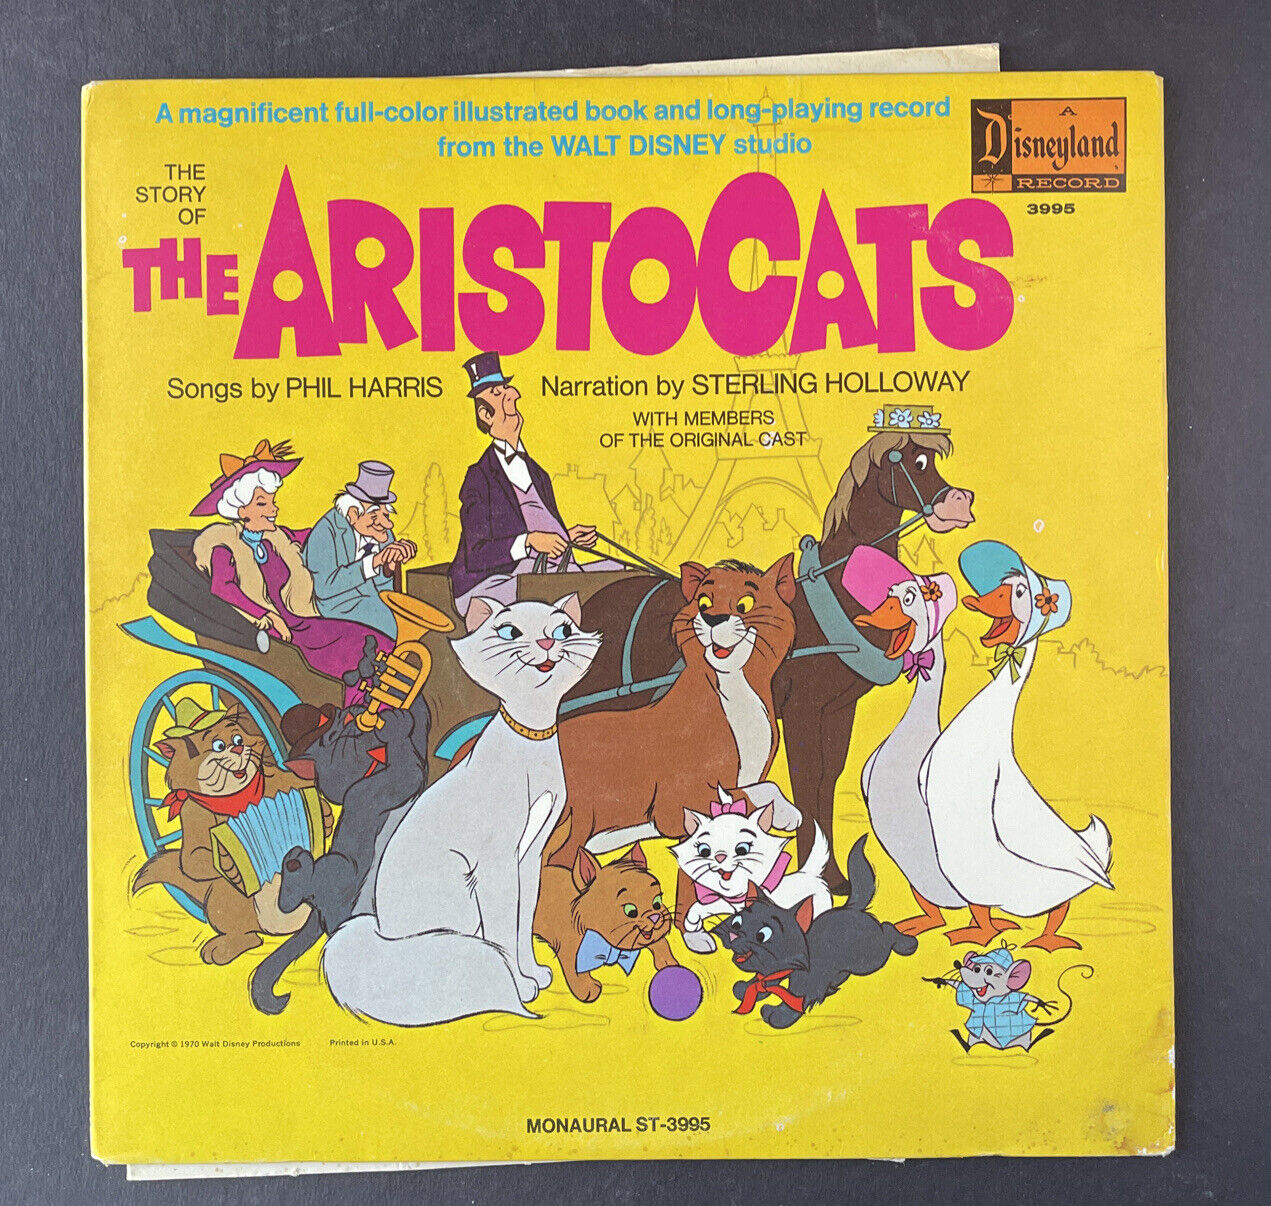 The Story Of The Aristocats Magnificent Full-Color Book And Long-playing Record